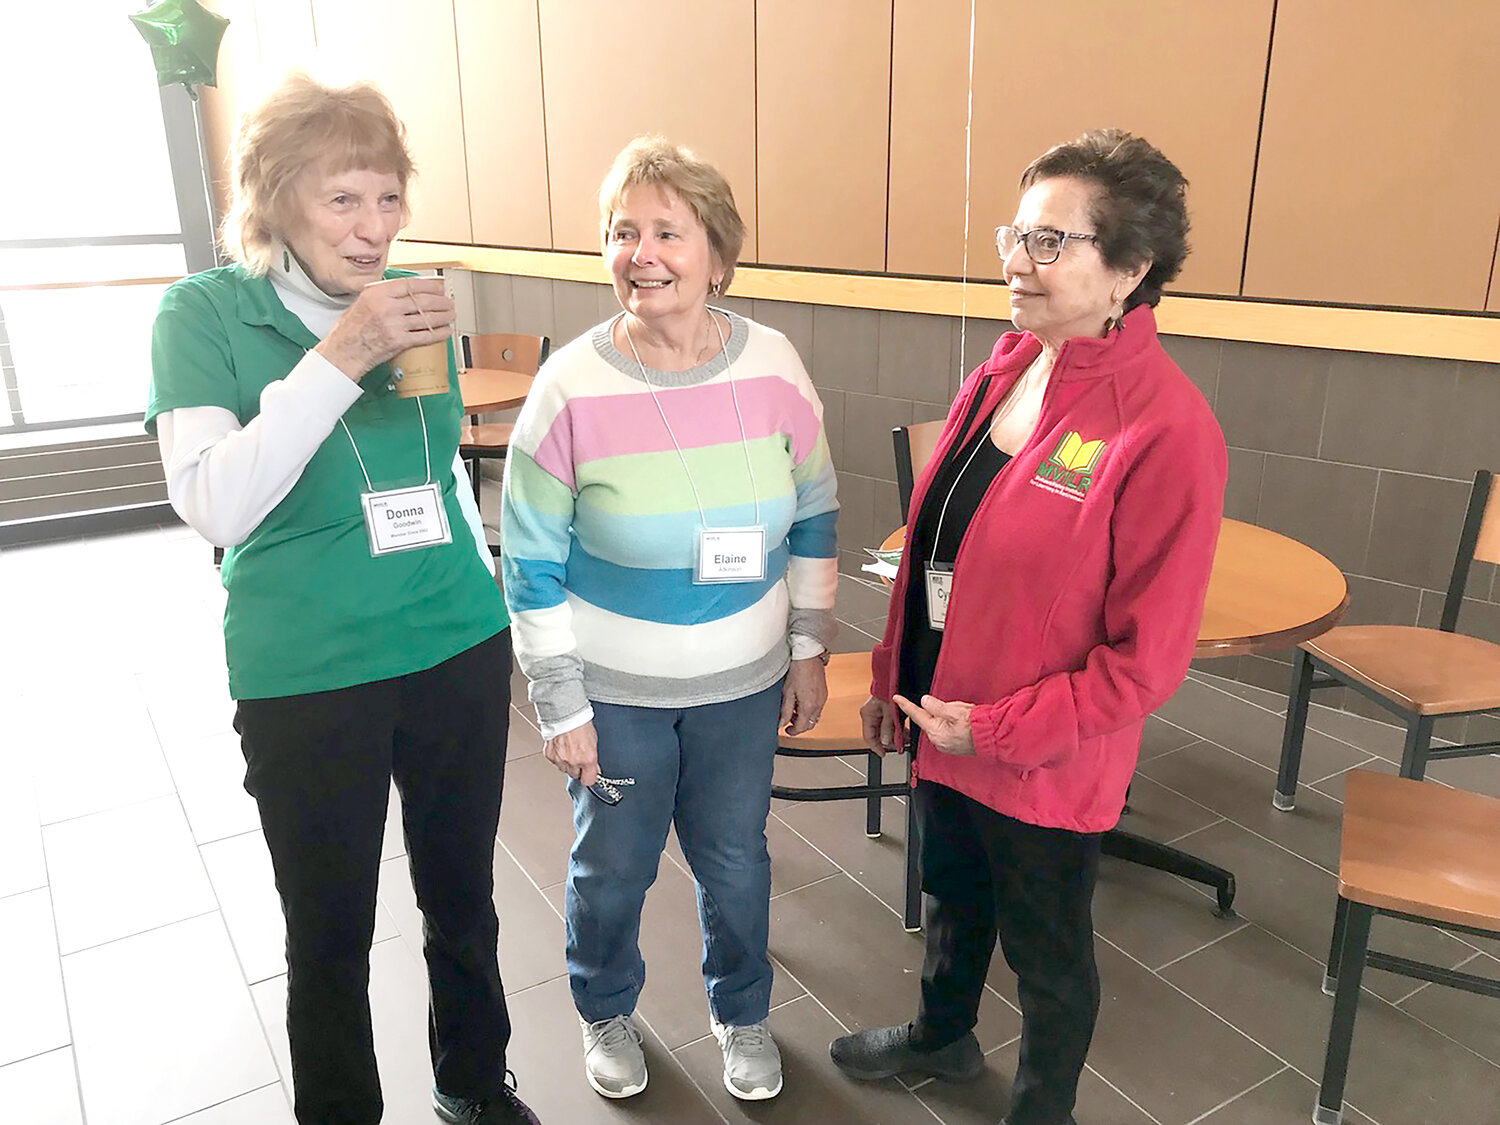 Program members, from left, Donna Goodwin, Elaine Atkinson and Cynthia DeTraglia chat Thursday, March 9 during the Mohawk Valley Institute for Learning in Retirement open house event at Mohawk Valley Community College in Rome.